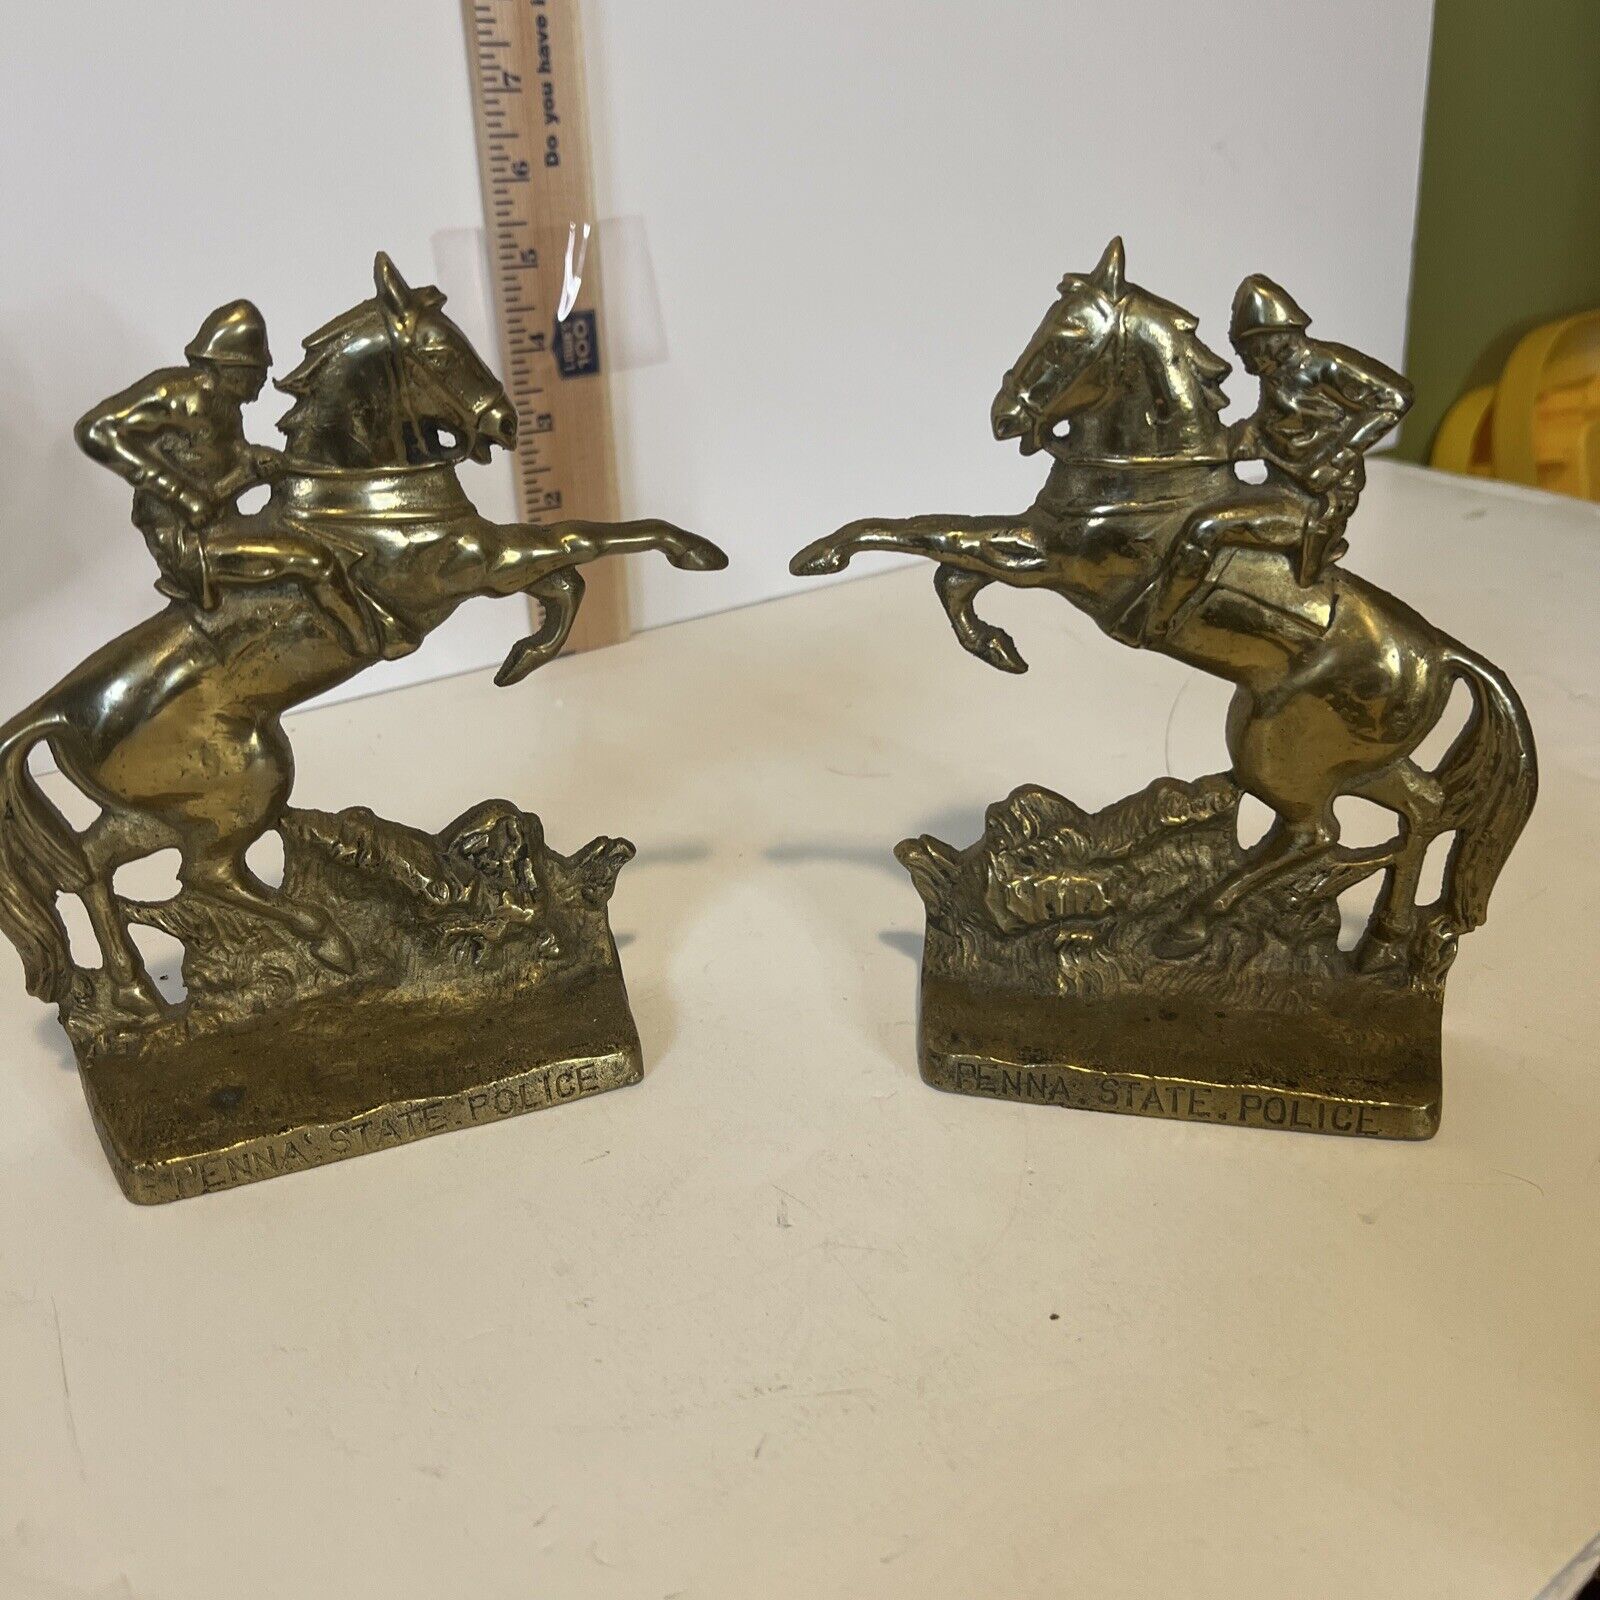 2 - Antique 1945 Pennsylvania State Police Horse Heavy Brass Bookends  Doorstops